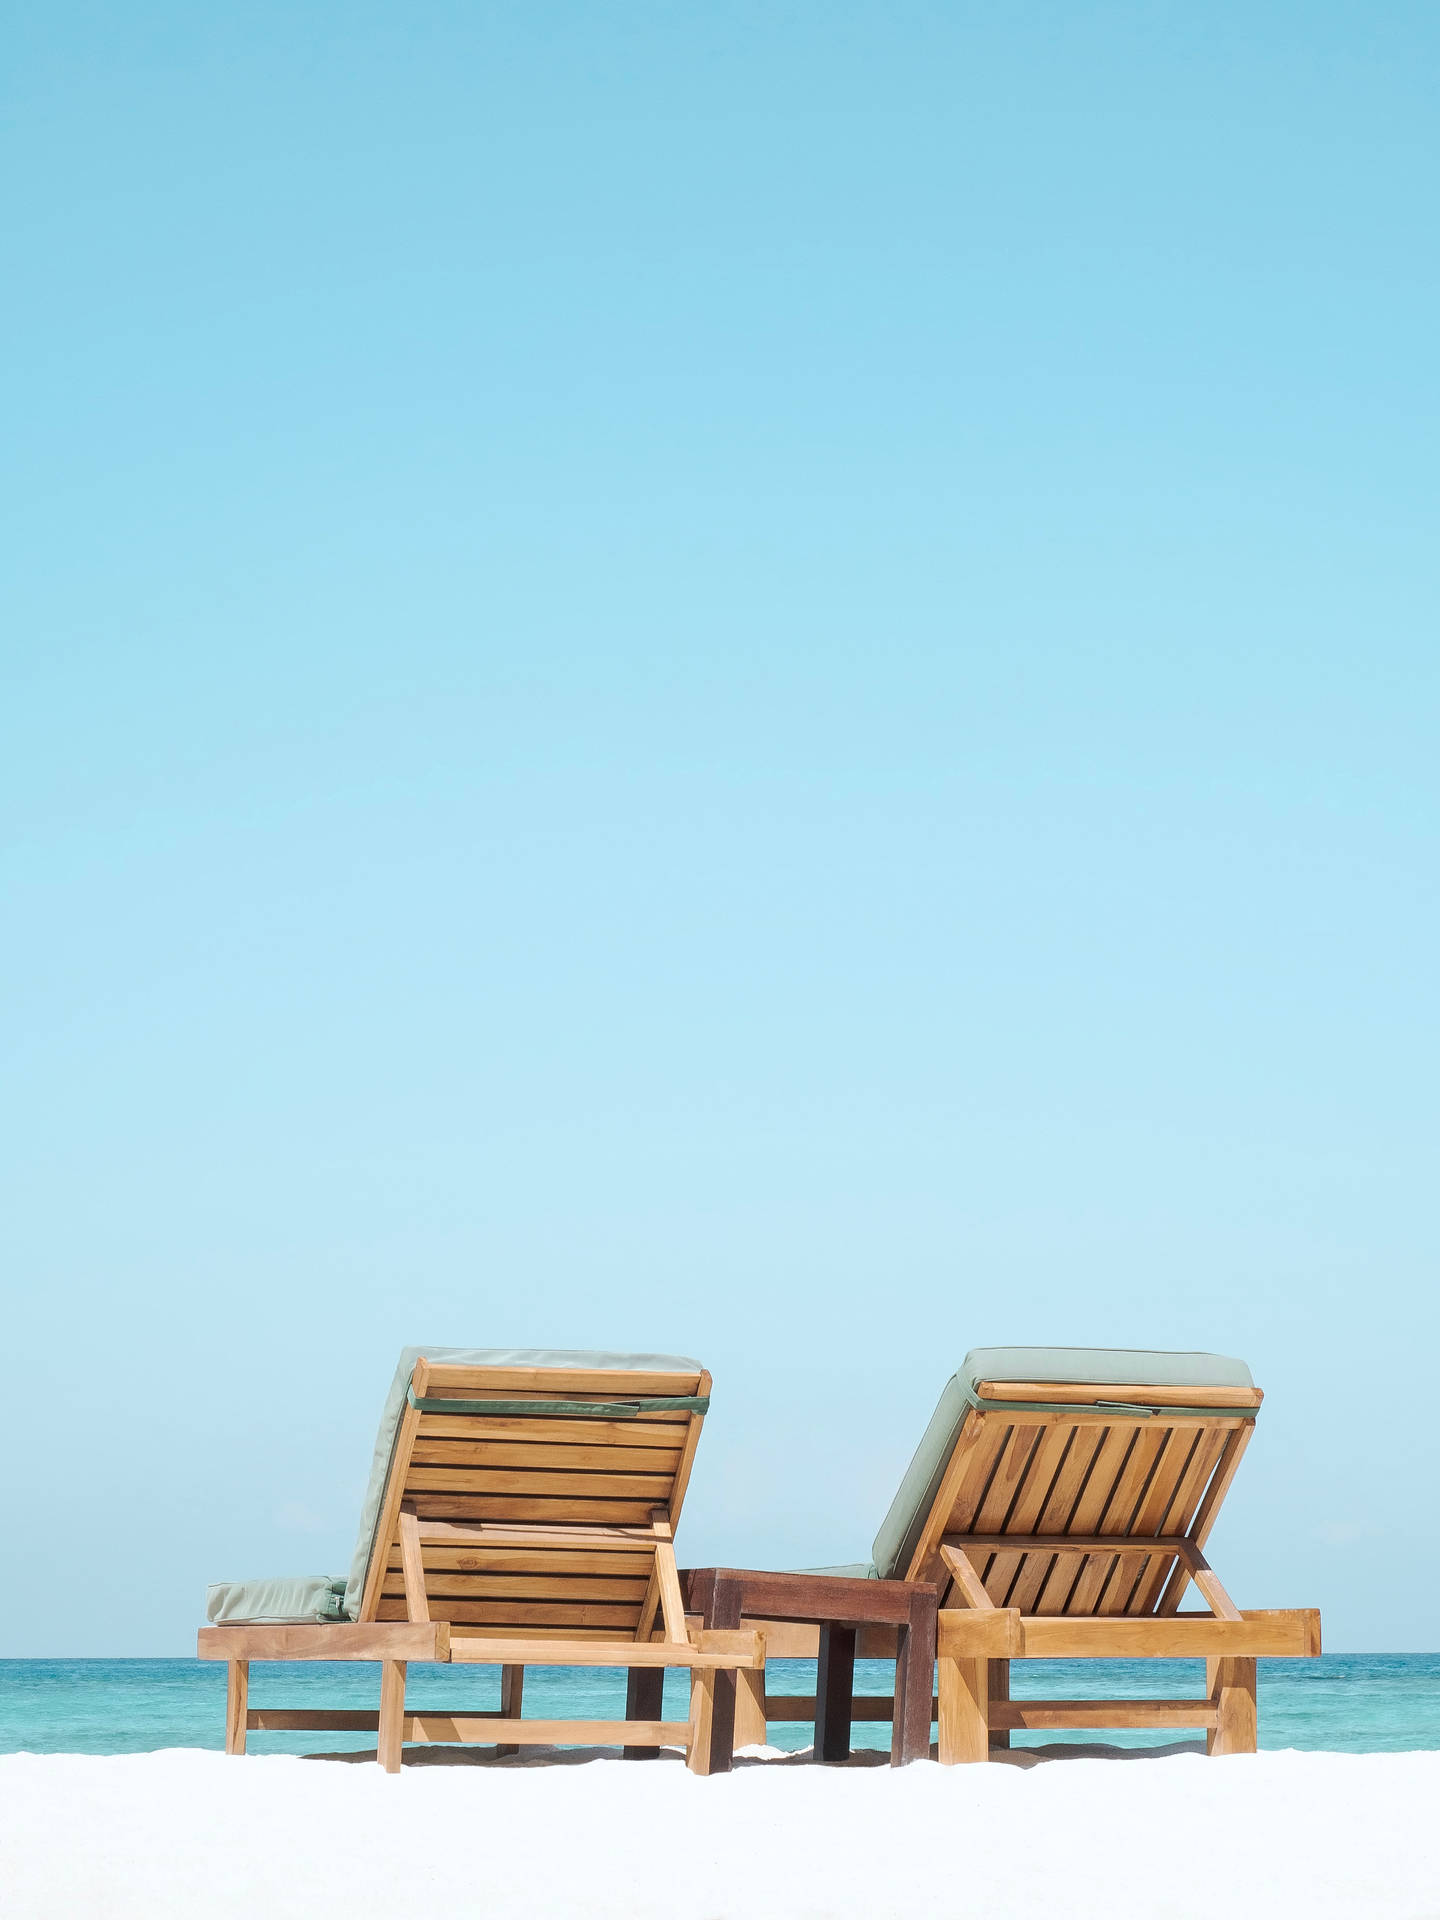 Tranquil Beach Loungers Awaiting Visitors